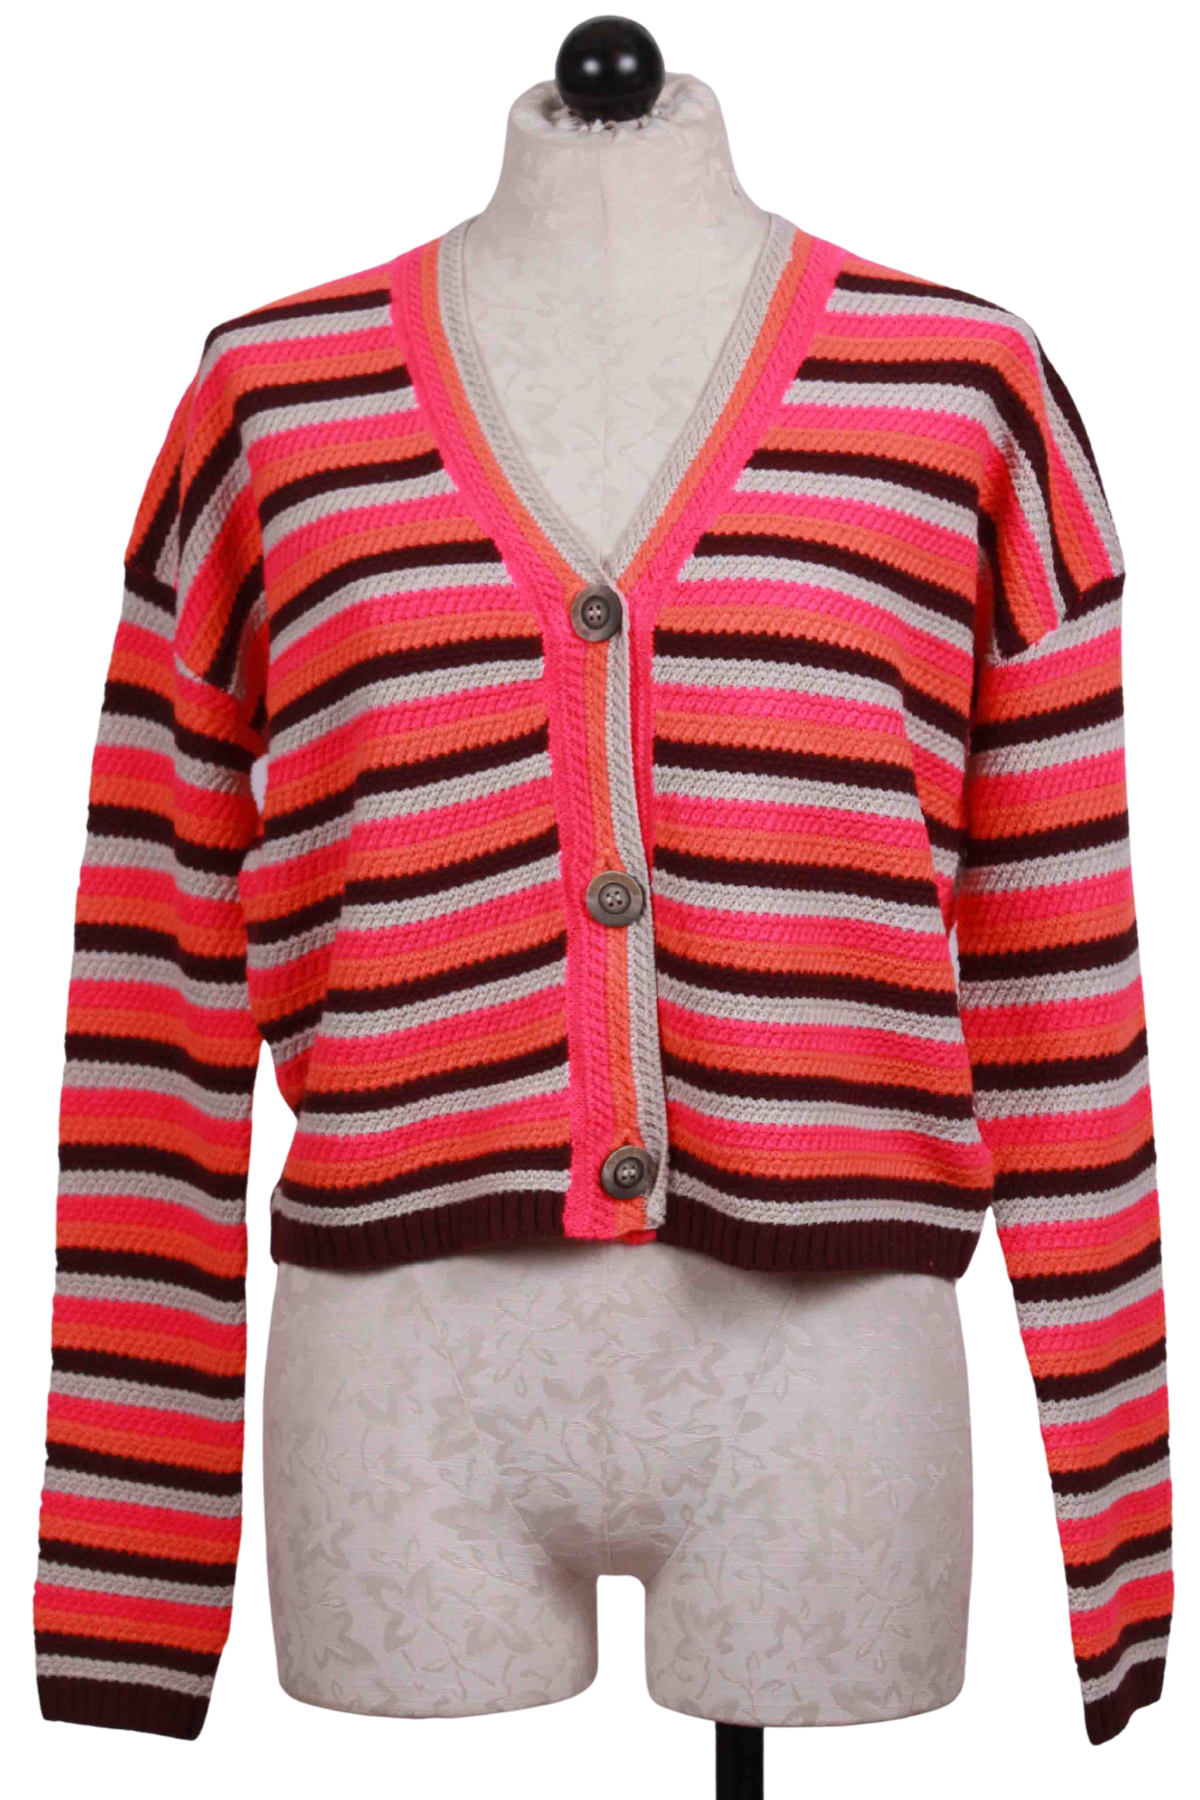 Neon Striped Pop Cardi by Lisa Todd